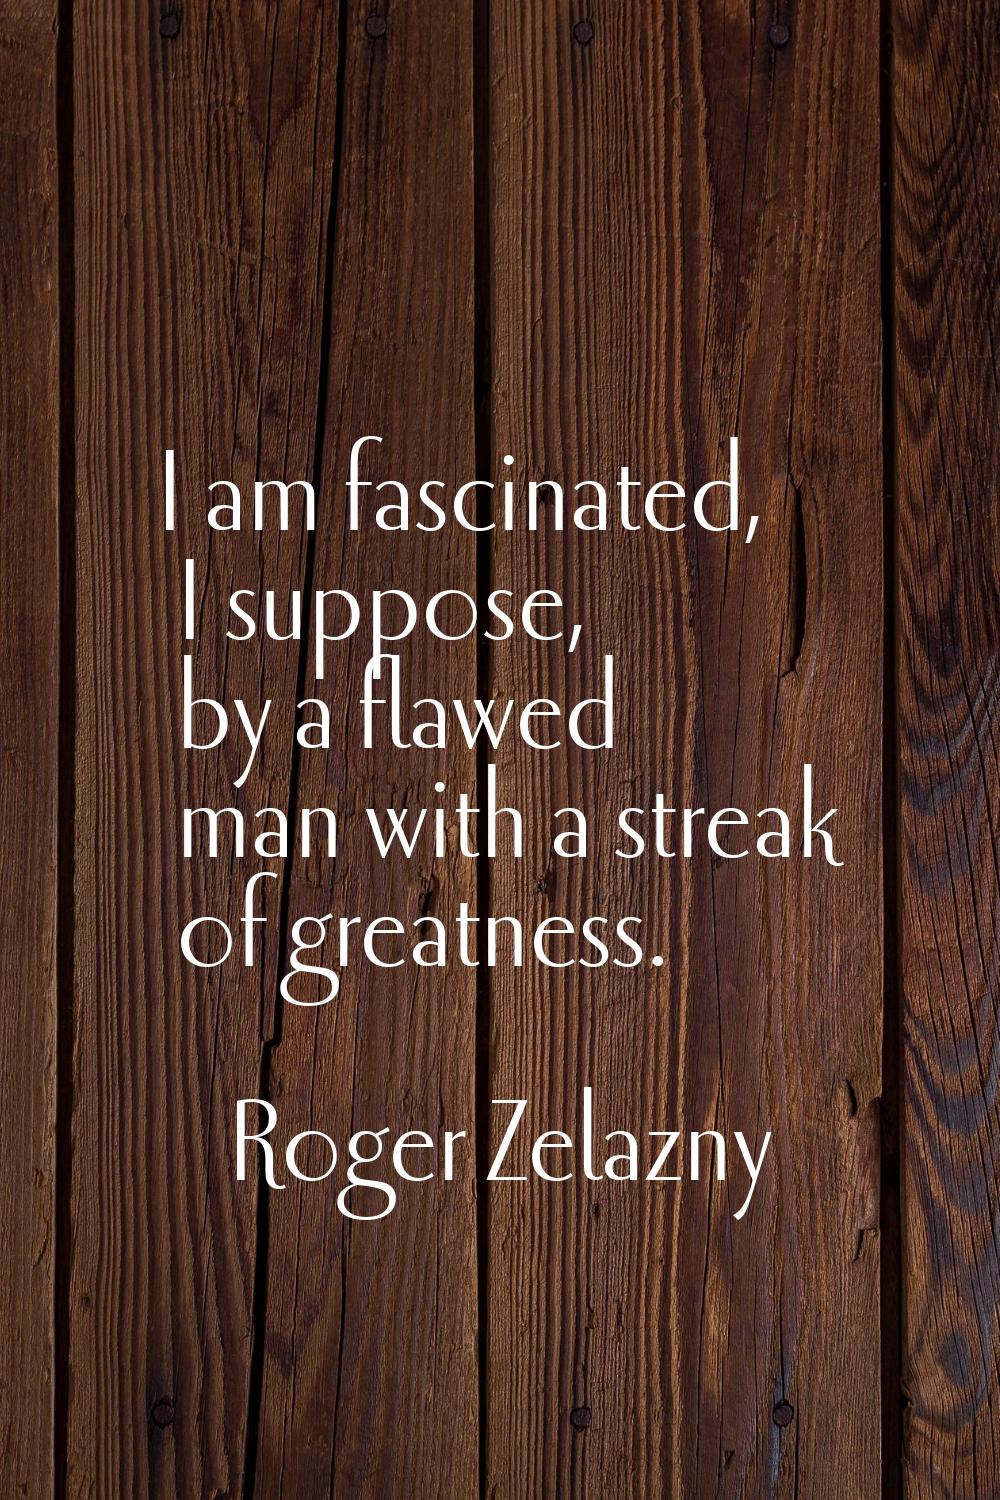 I am fascinated, I suppose, by a flawed man with a streak of greatness.